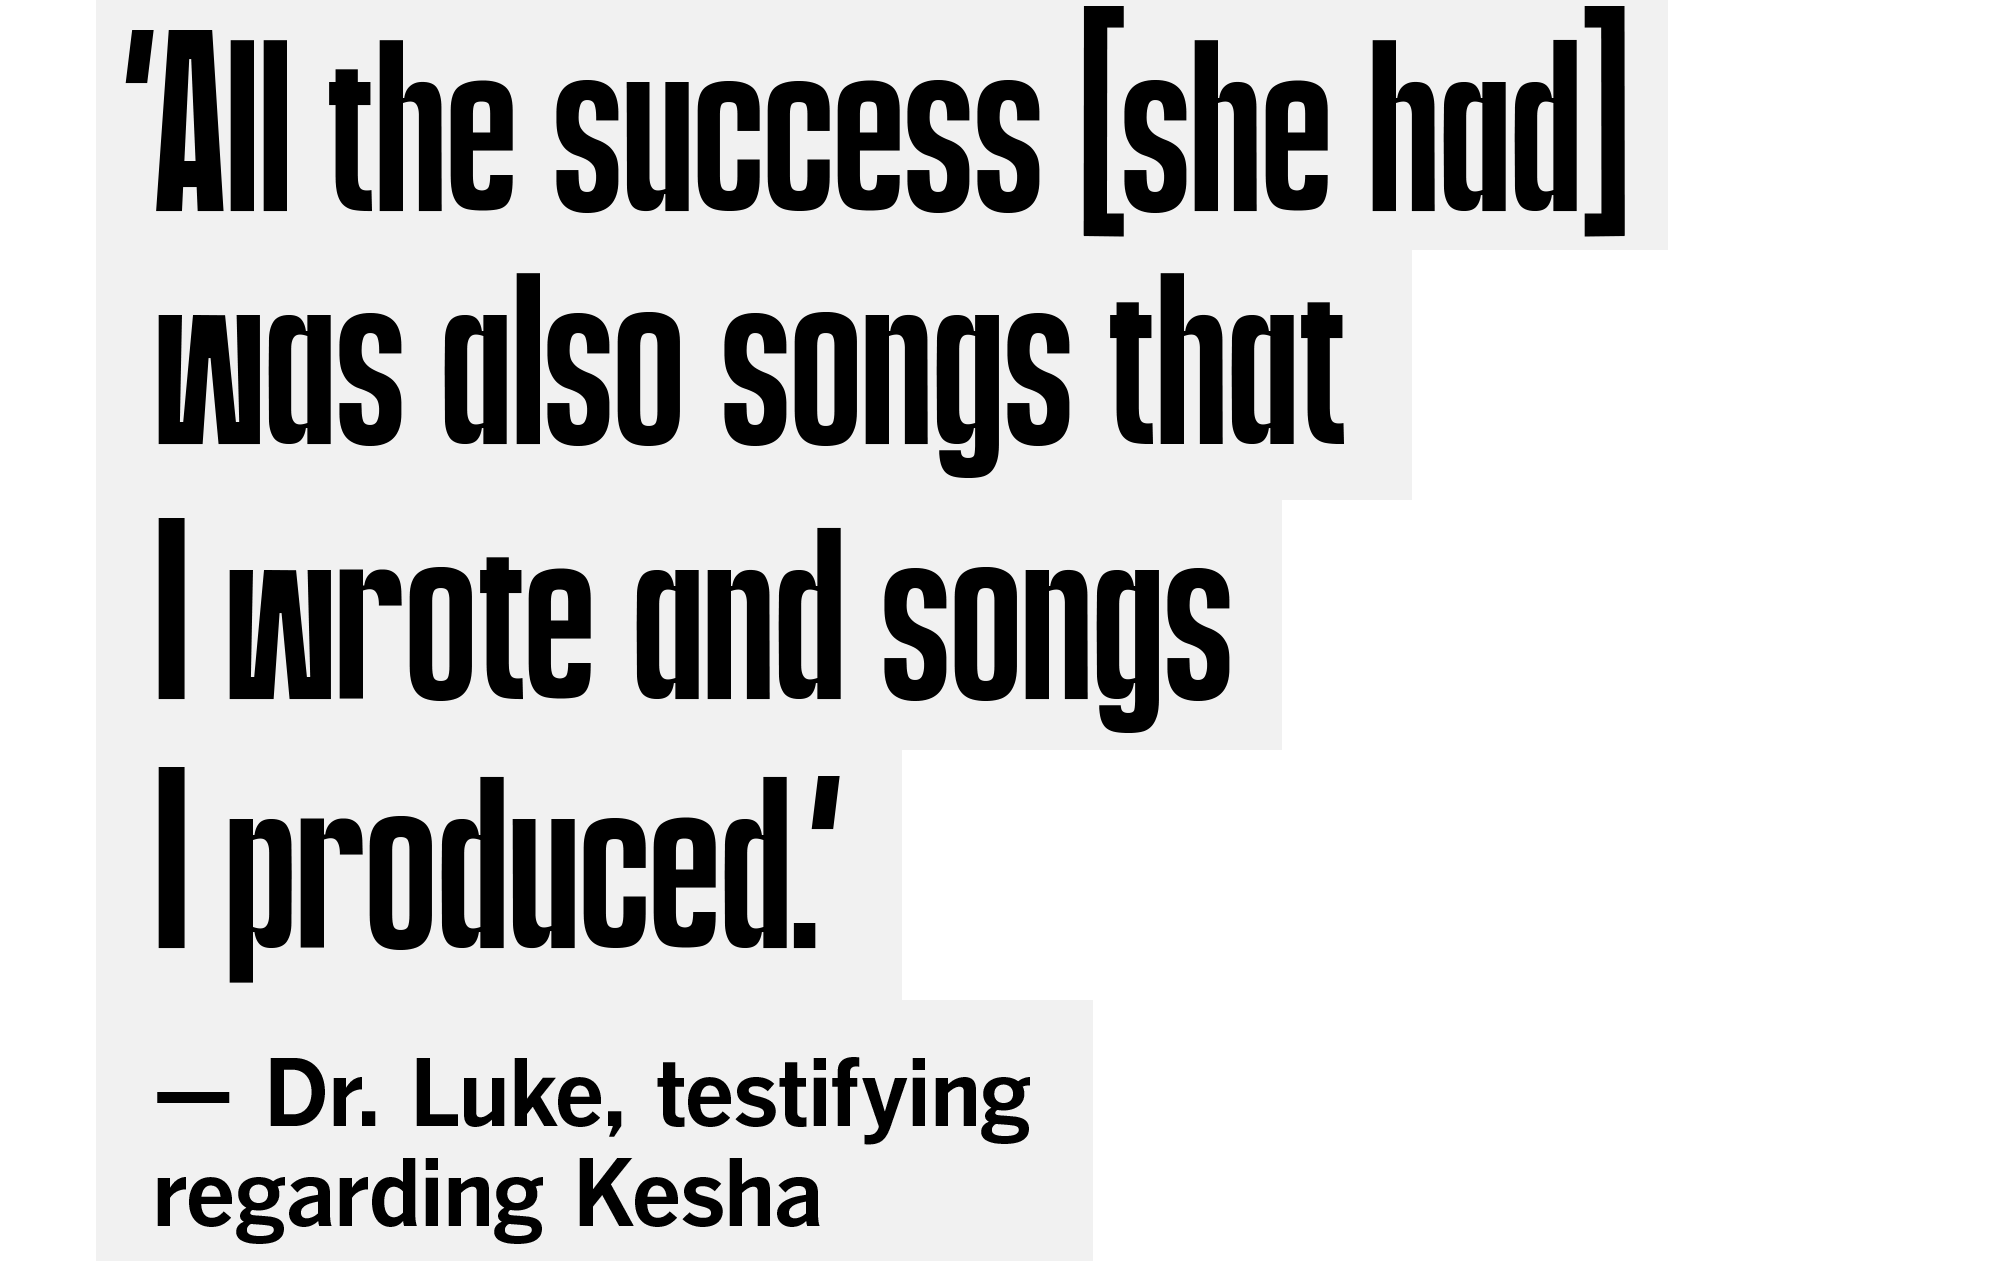 'All the success [she had] was also songs that I wrote and songs I produced.' — Dr Luke testifying regarding Kesha